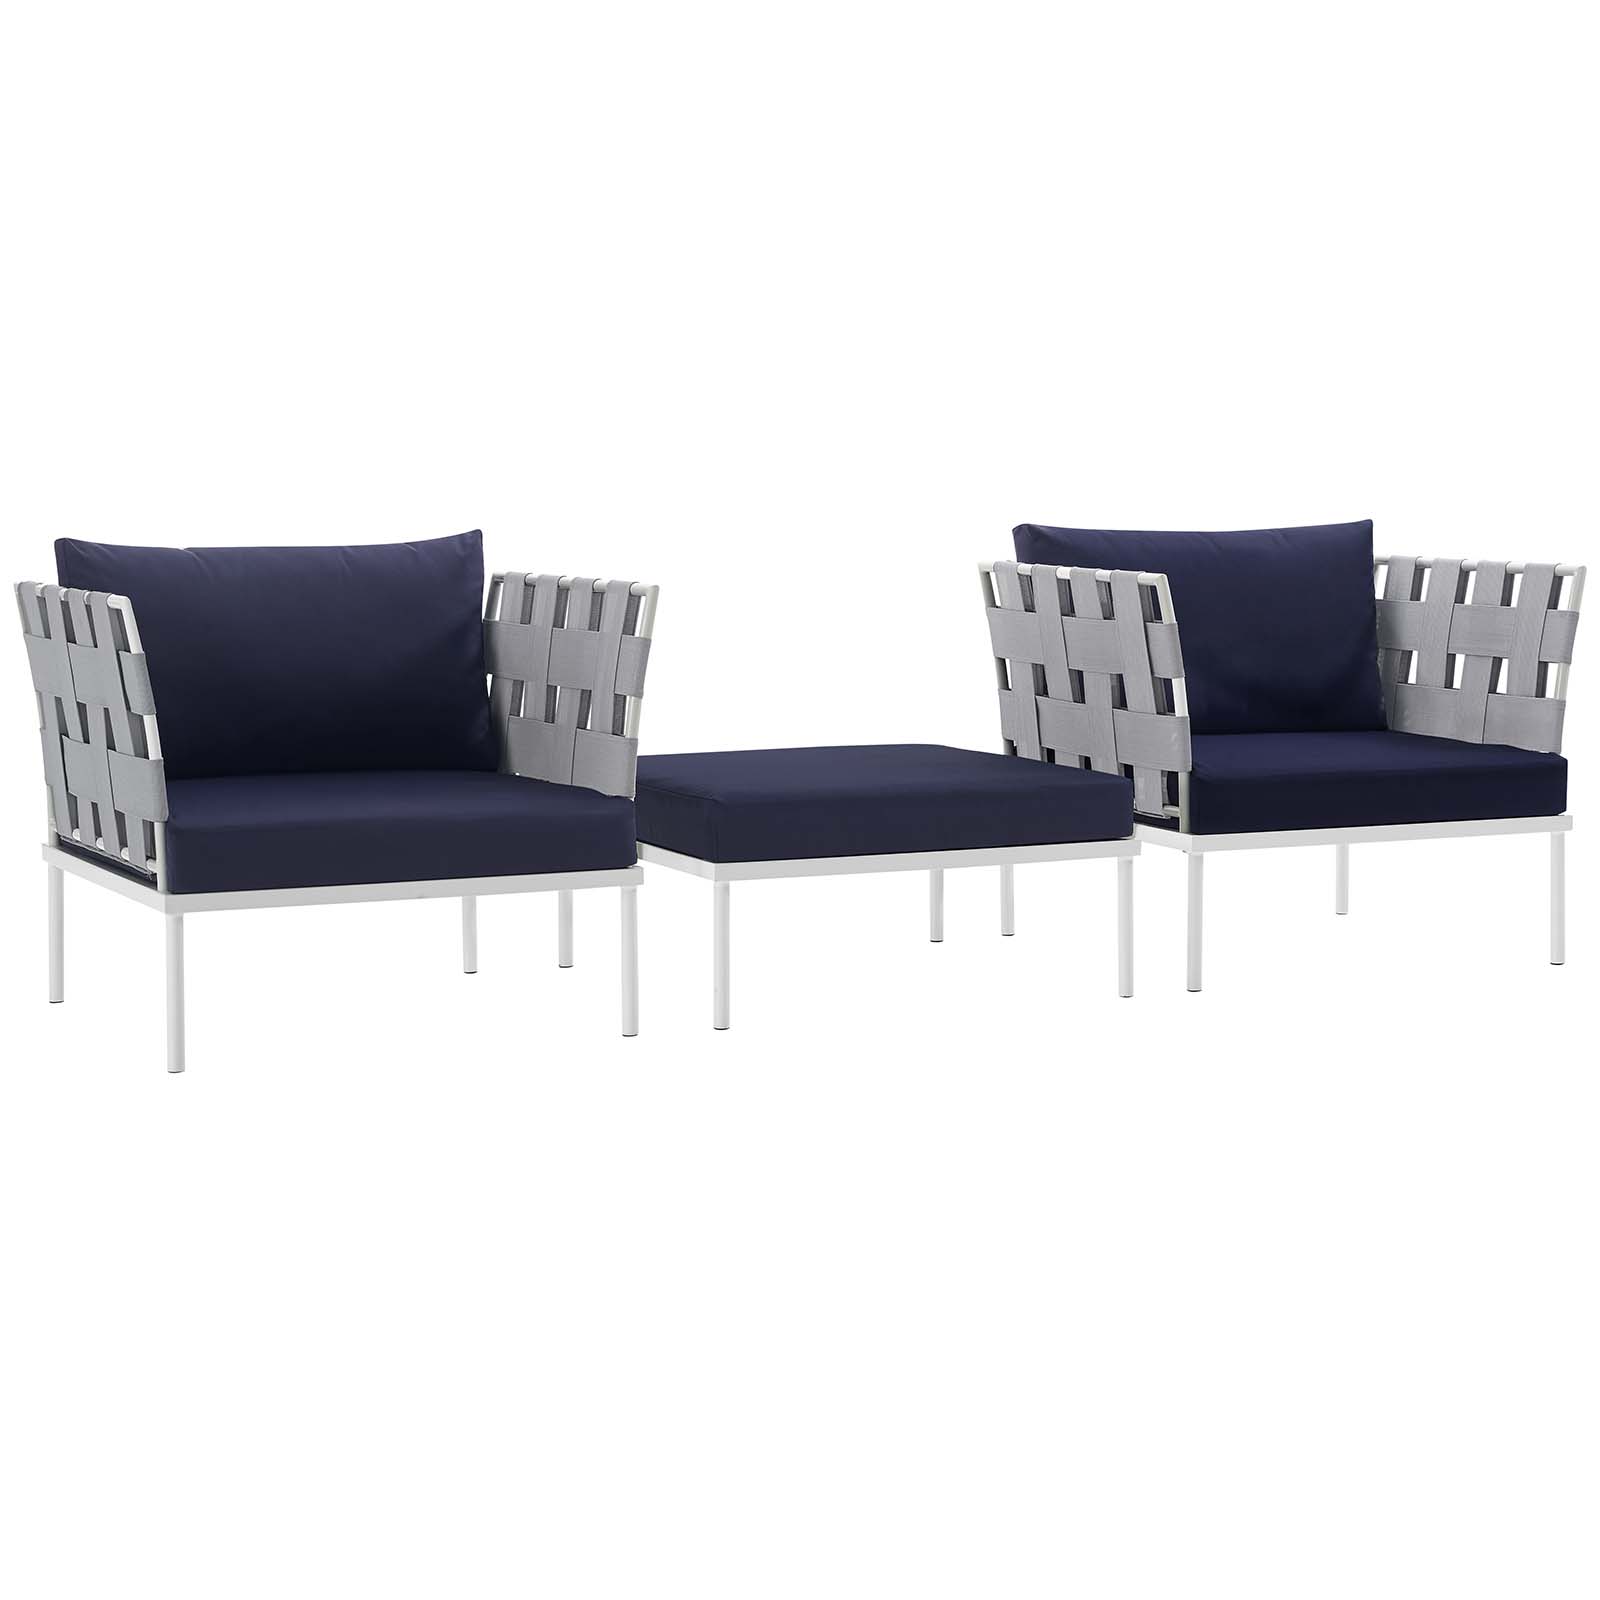 Modway Harmony 3 Piece Outdoor Patio Aluminum Sectional Sofa Set in White Navy - image 2 of 6